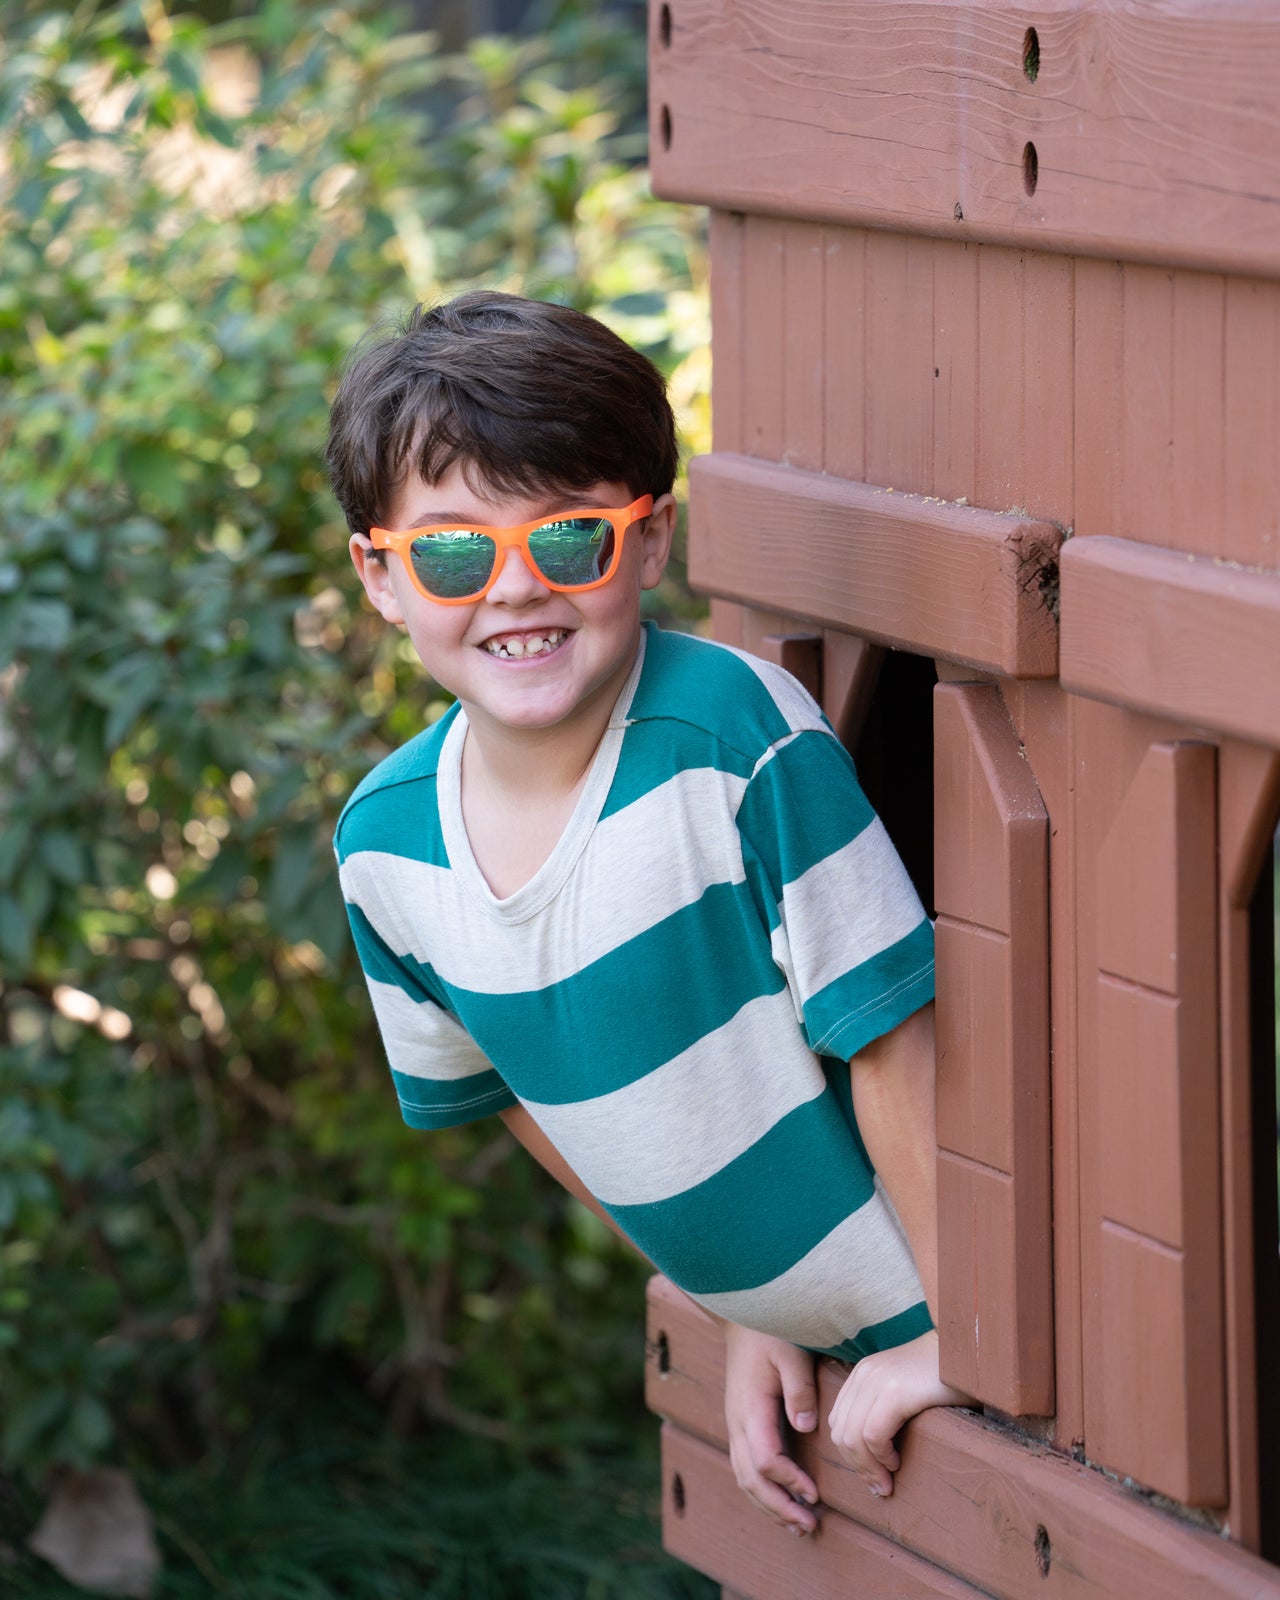 Little boy wearing polarized kids sunglasses by Sunnies shades in a transparent orange frame with reflective blue lenses.